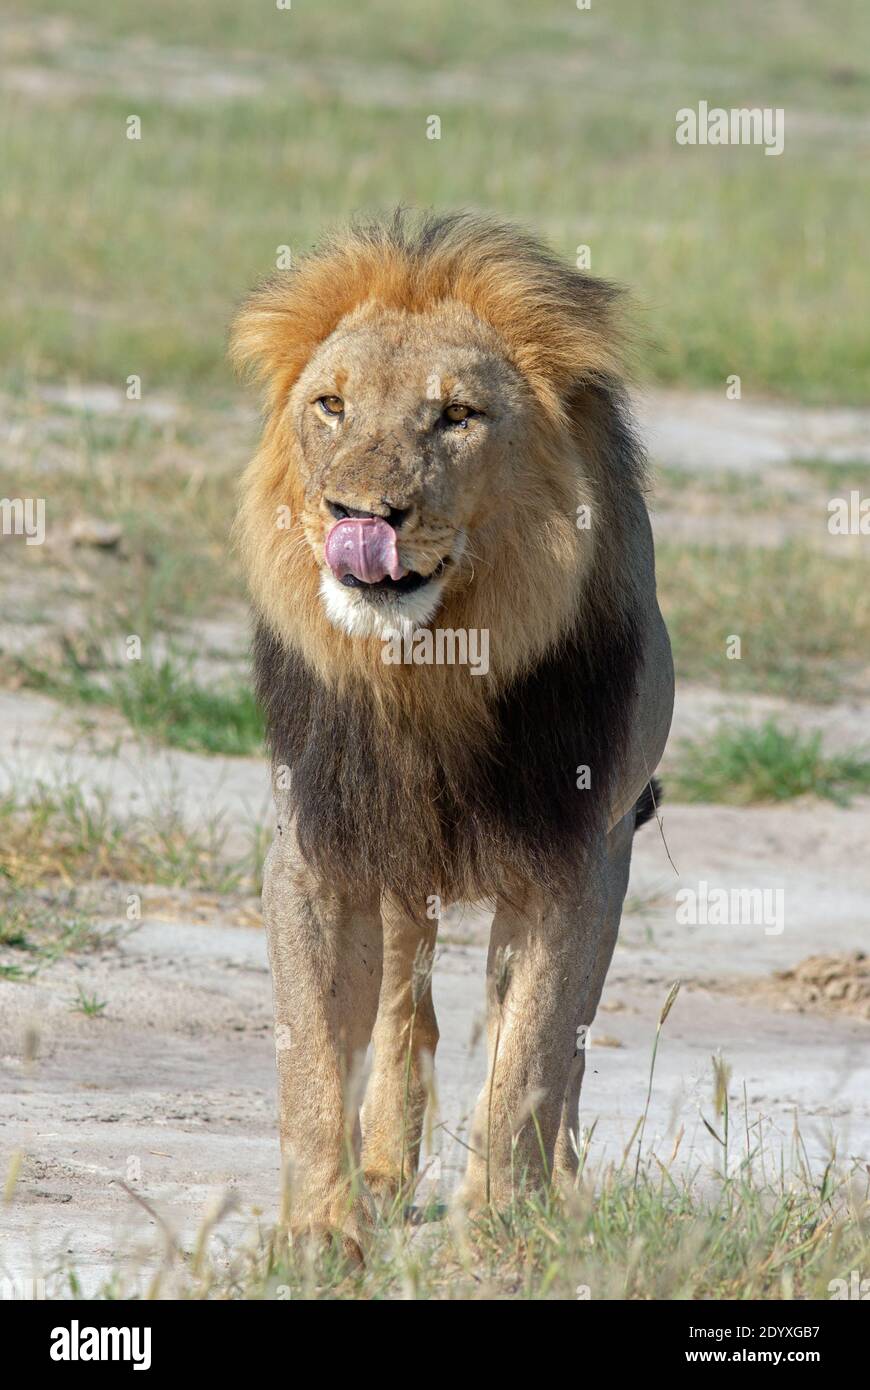 African Lion (Panthera leo). Anticipating interaction with others. Tongue licking lips. Upright, confident stance. Eyes looking towards a distant view Stock Photo